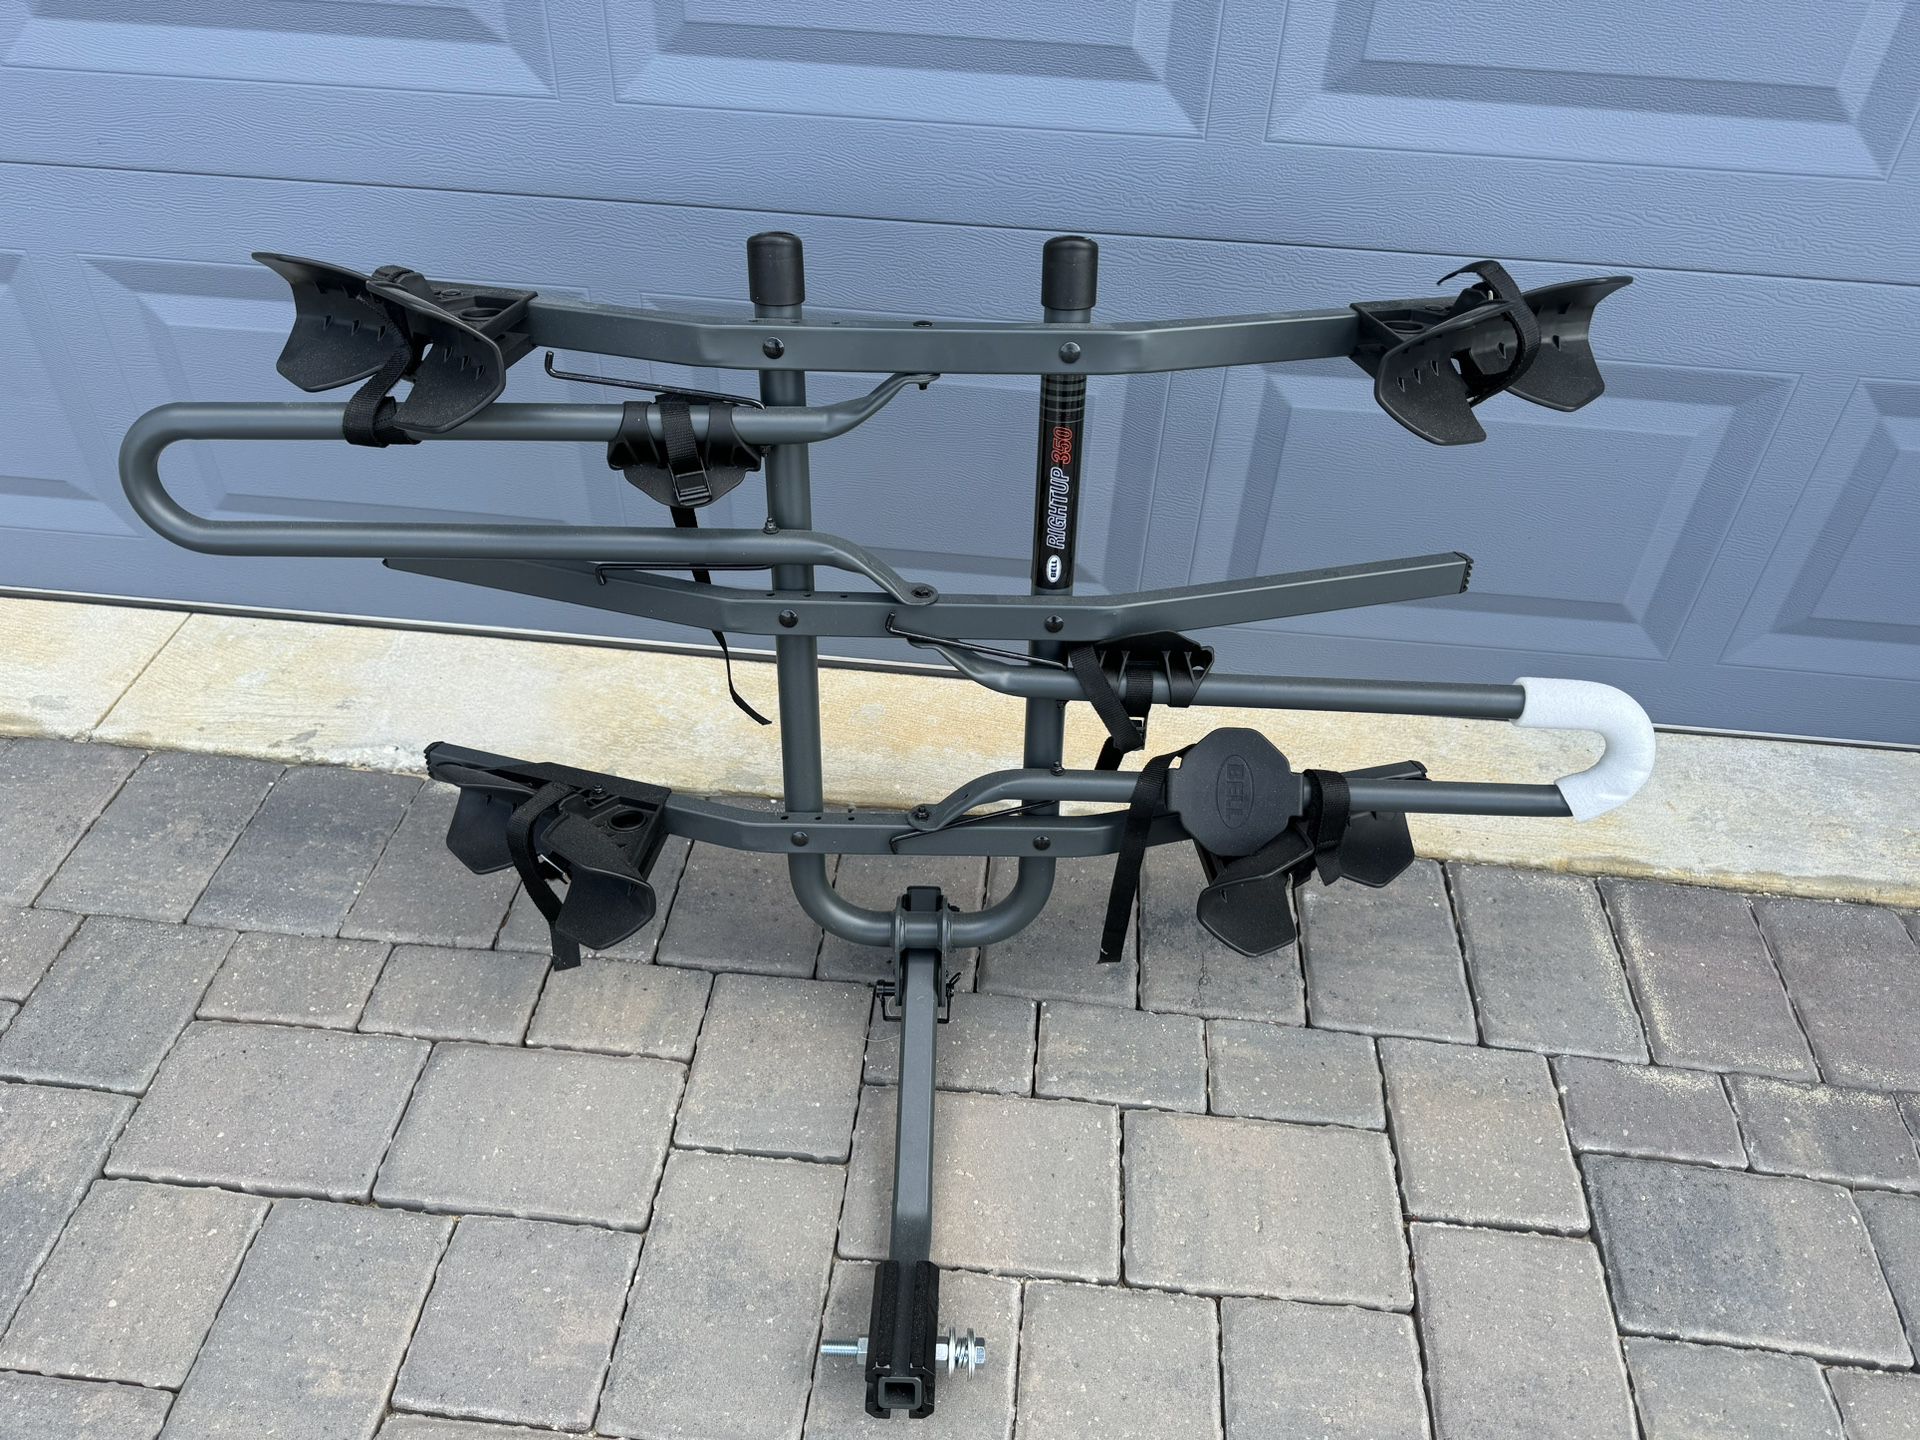 Platform Hitch Bike Rack - Bell Right Up 350 3-Bicycle (Like NEW)